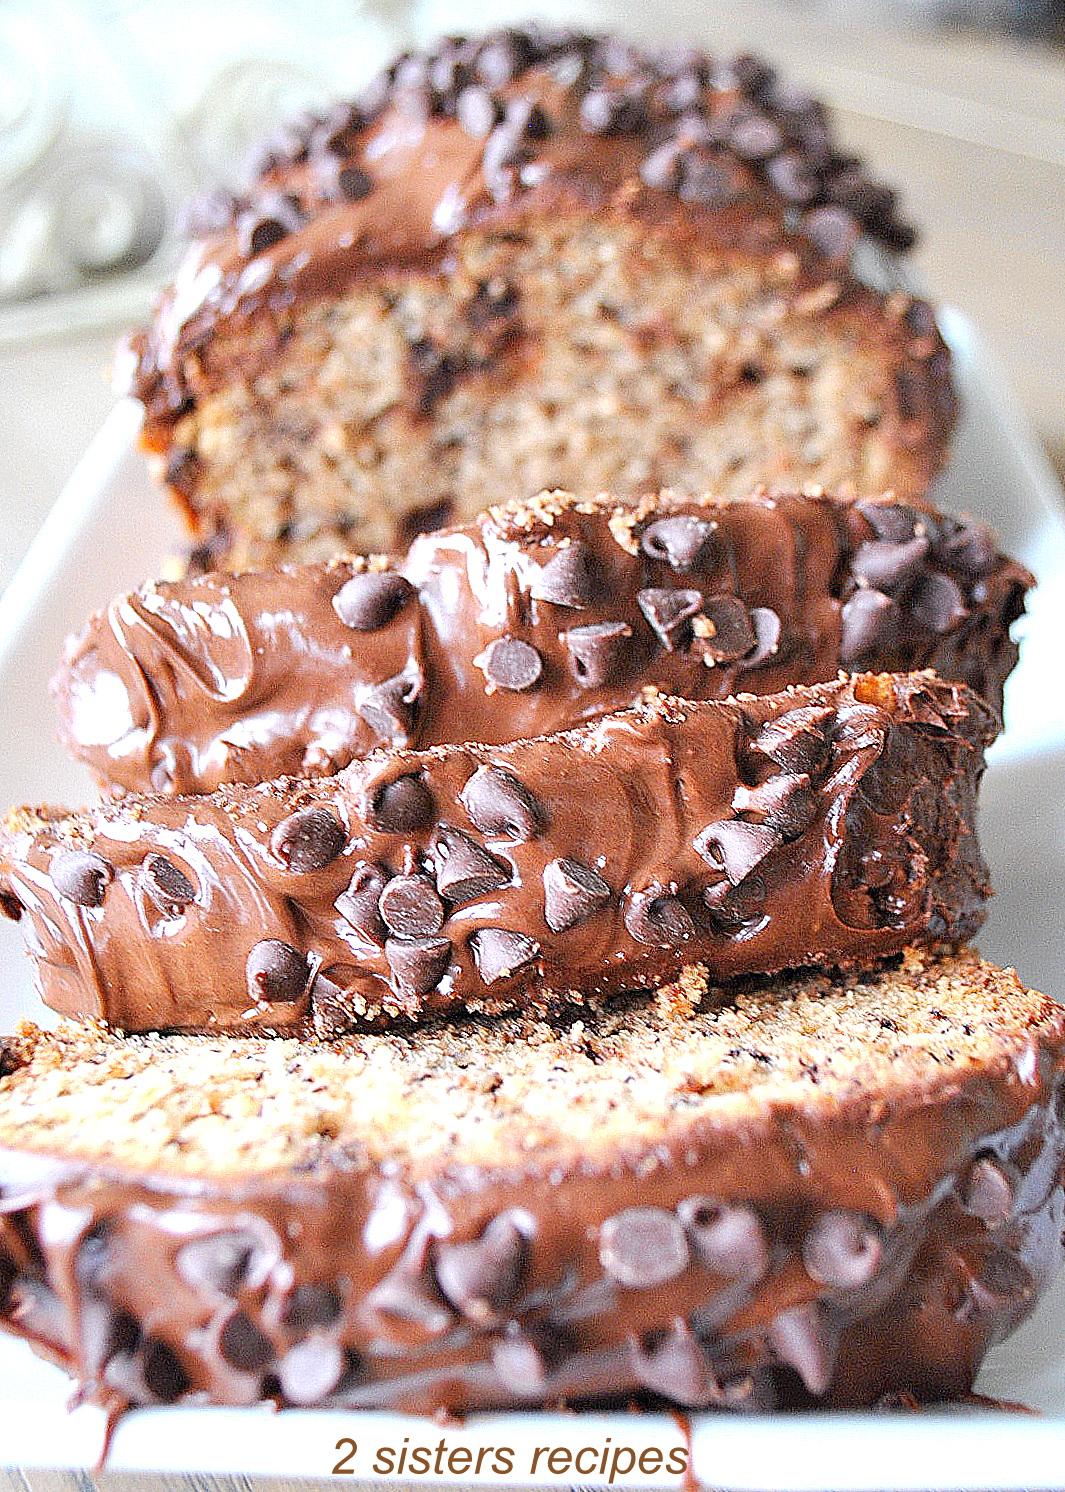 A loaf of bread with chocolate frosting, and mini chocolate chips on top, sliced on a white platter.